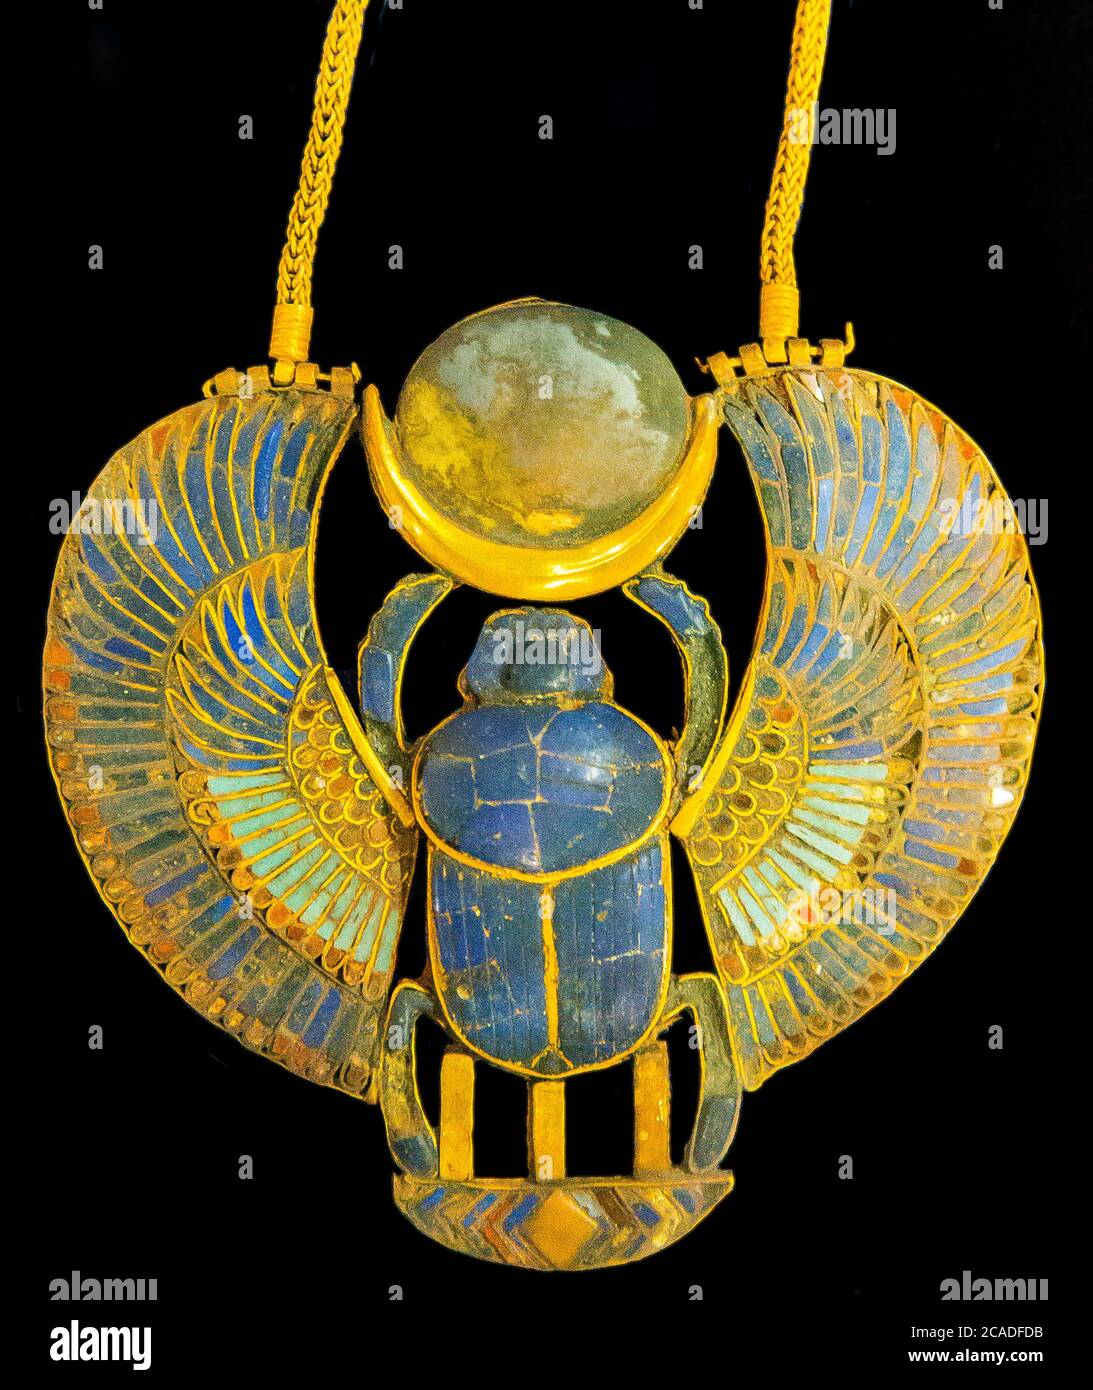 Egypt, Cairo, Egyptian Museum, Tutankhamon jewellery, from his tomb in Luxor : A pectoral in the form of a winged scarab. Stock Photo